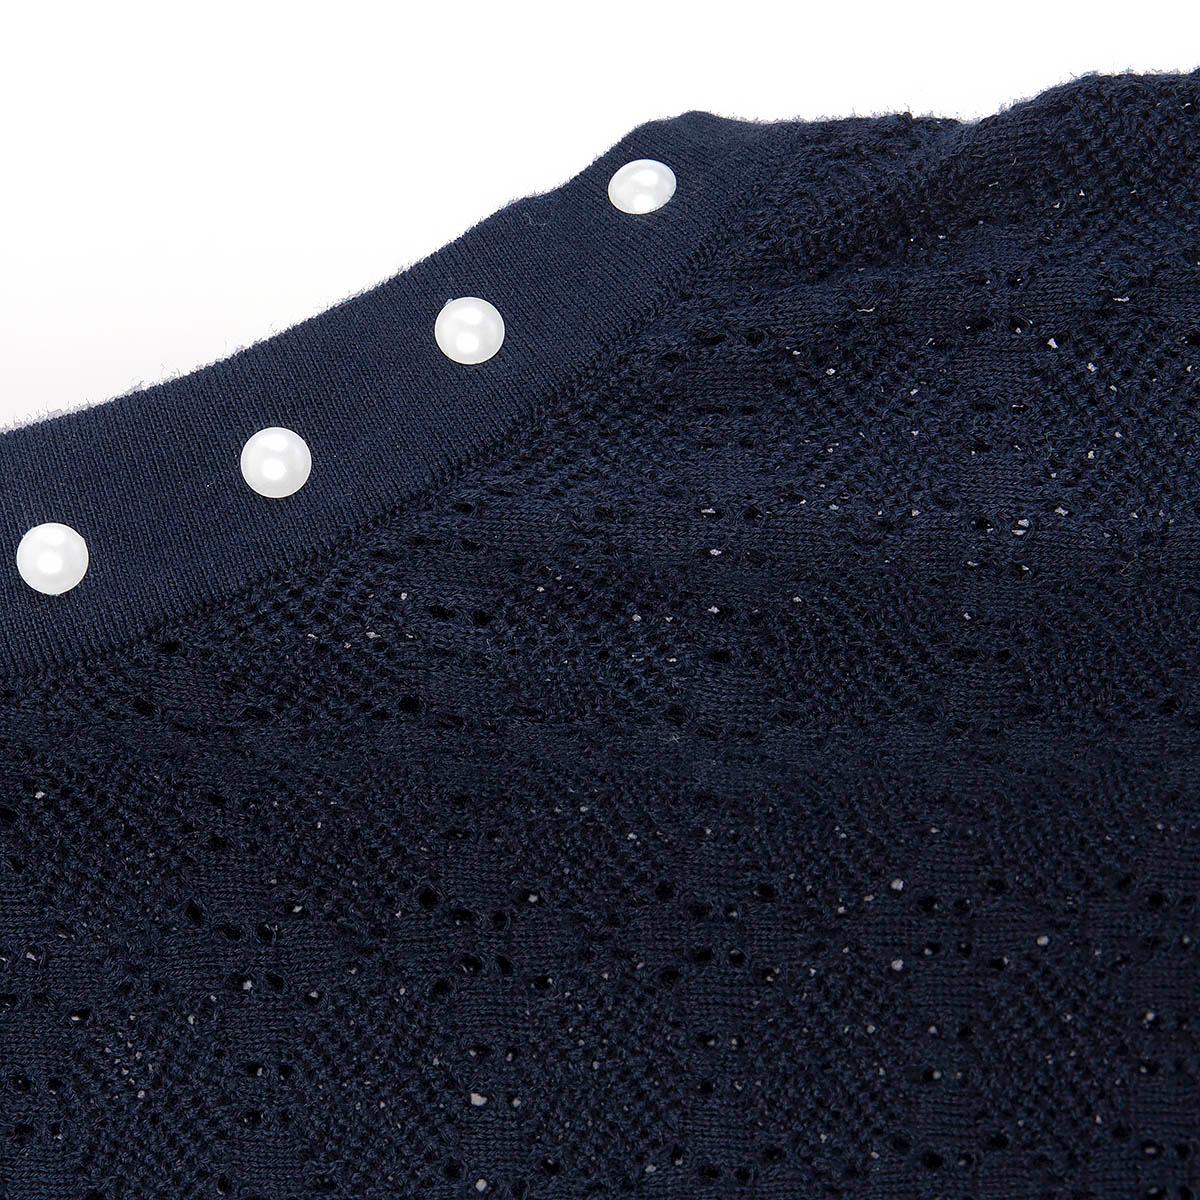 CHANEL navy blue cotton 2016 PEARL STUDDED KNIT Shirt 40 M For Sale 2